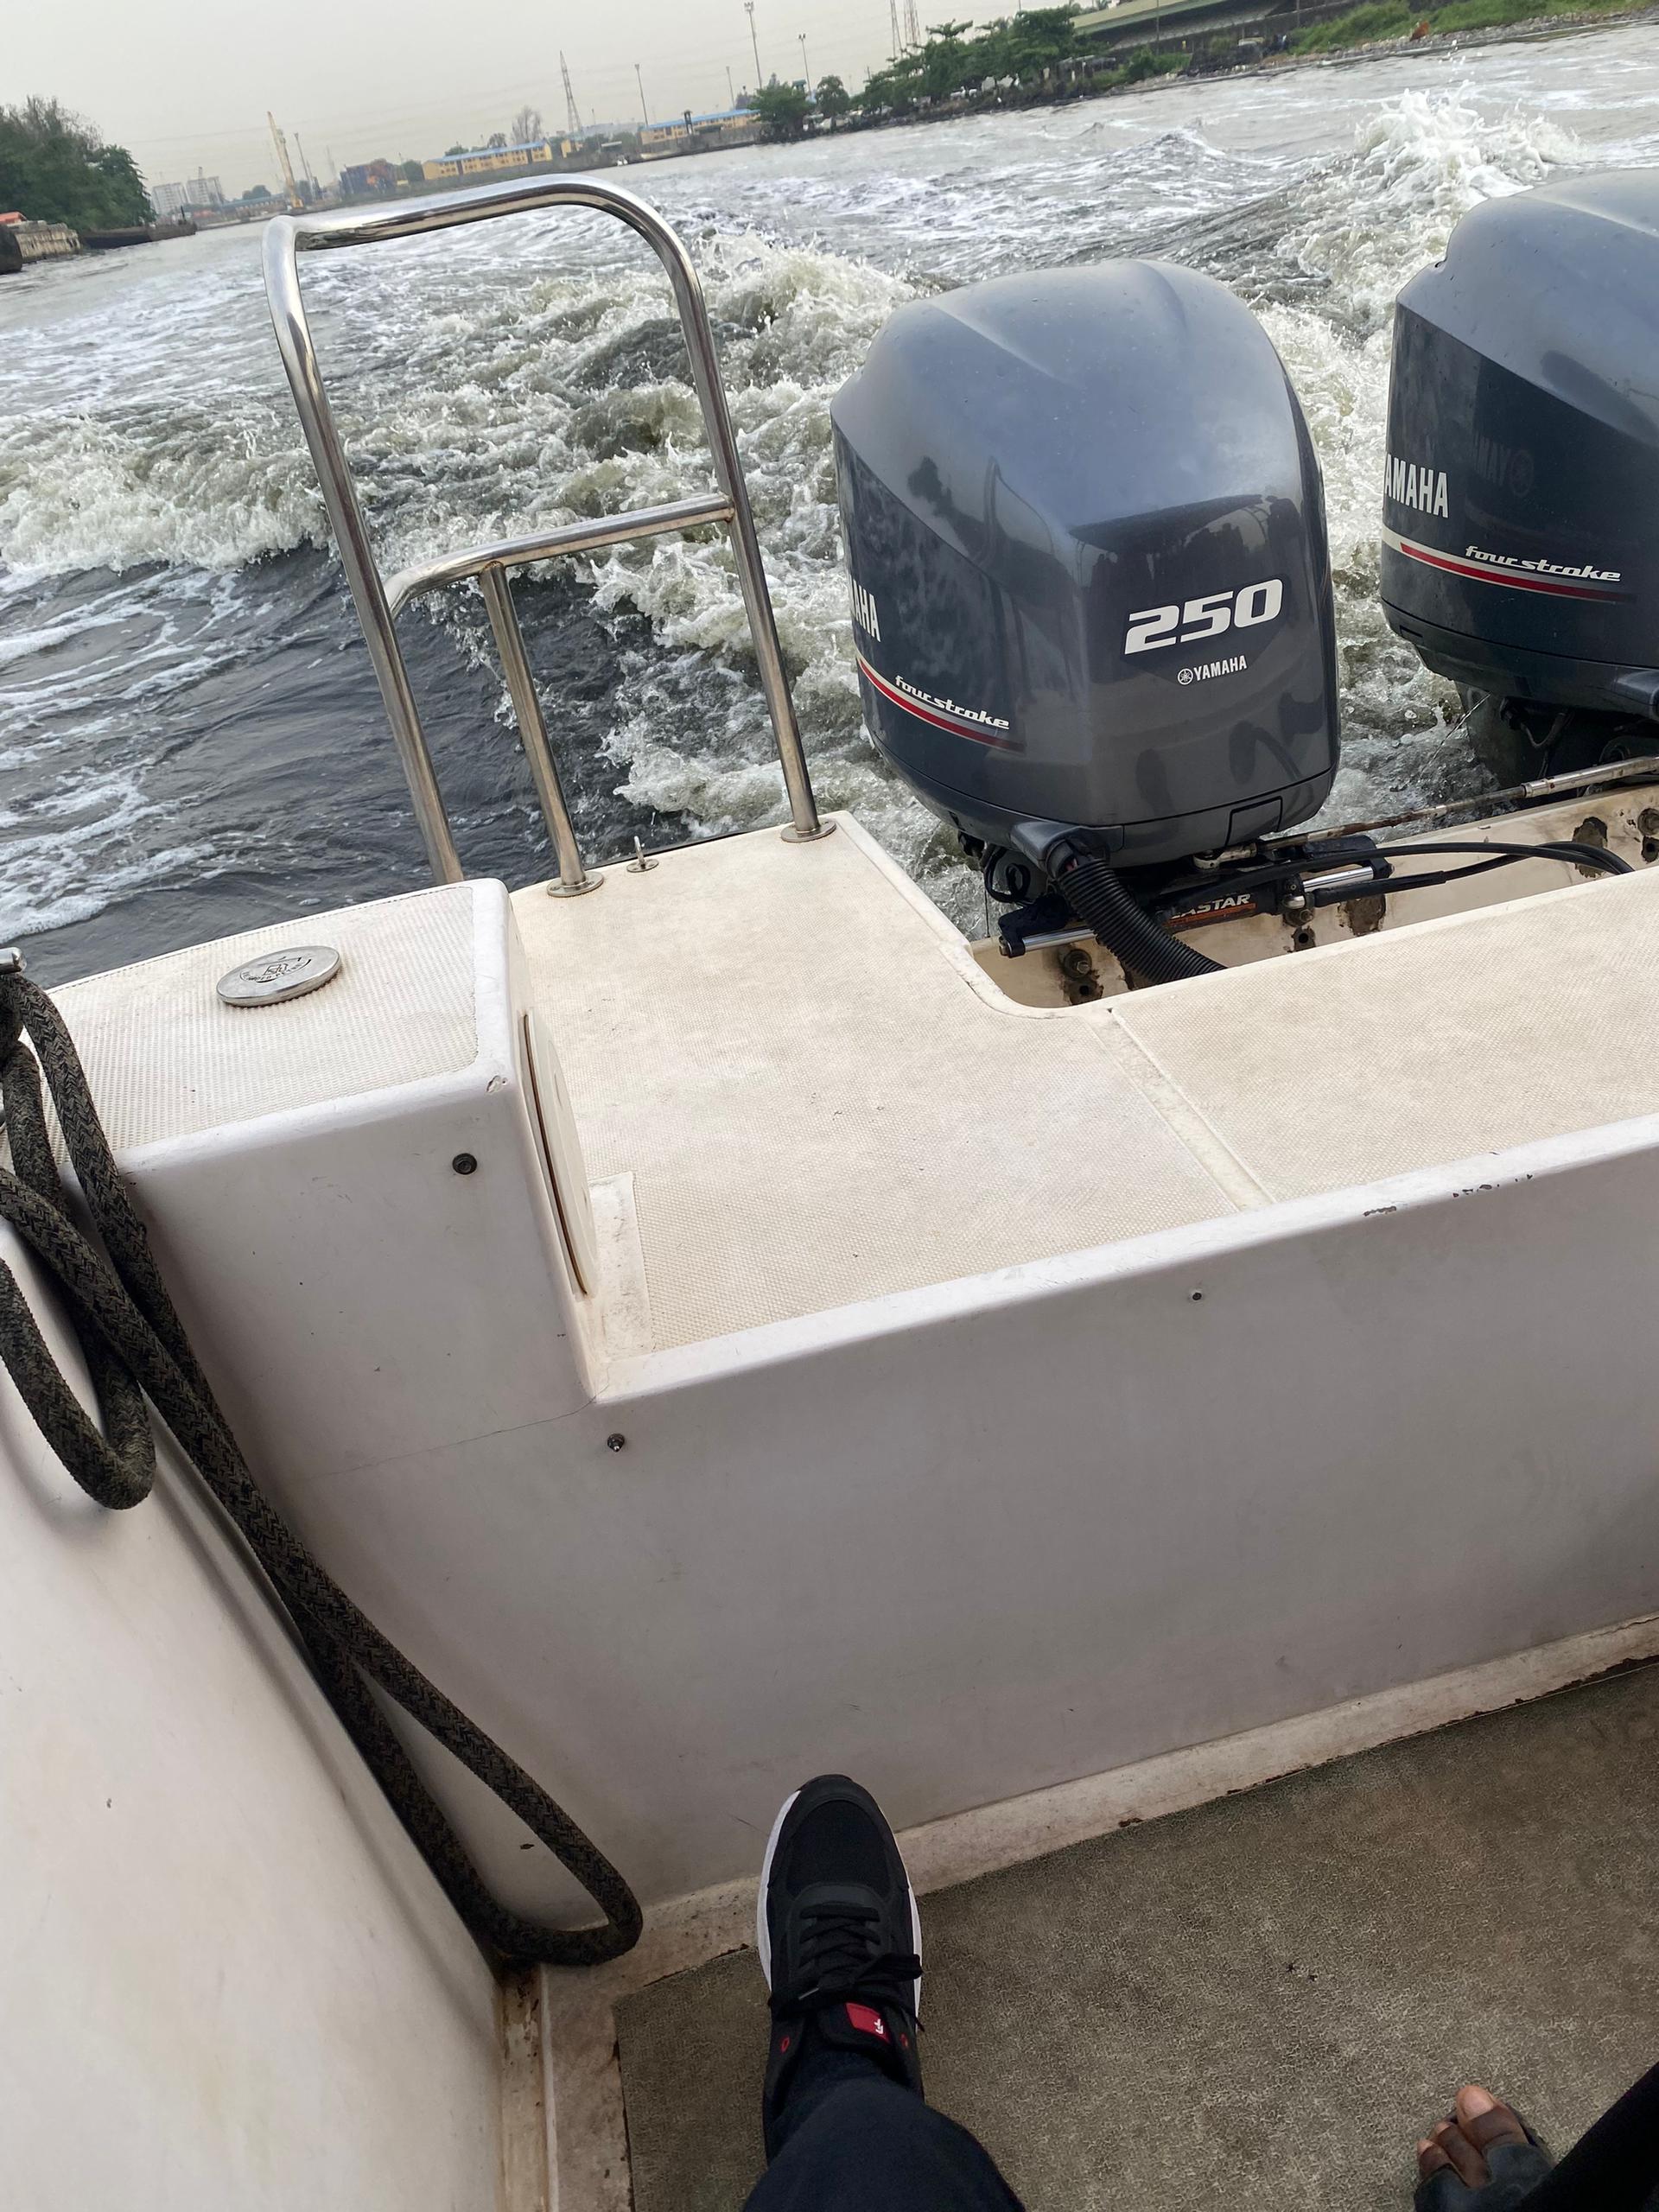 You want your boat to fly —Yahama 250HP